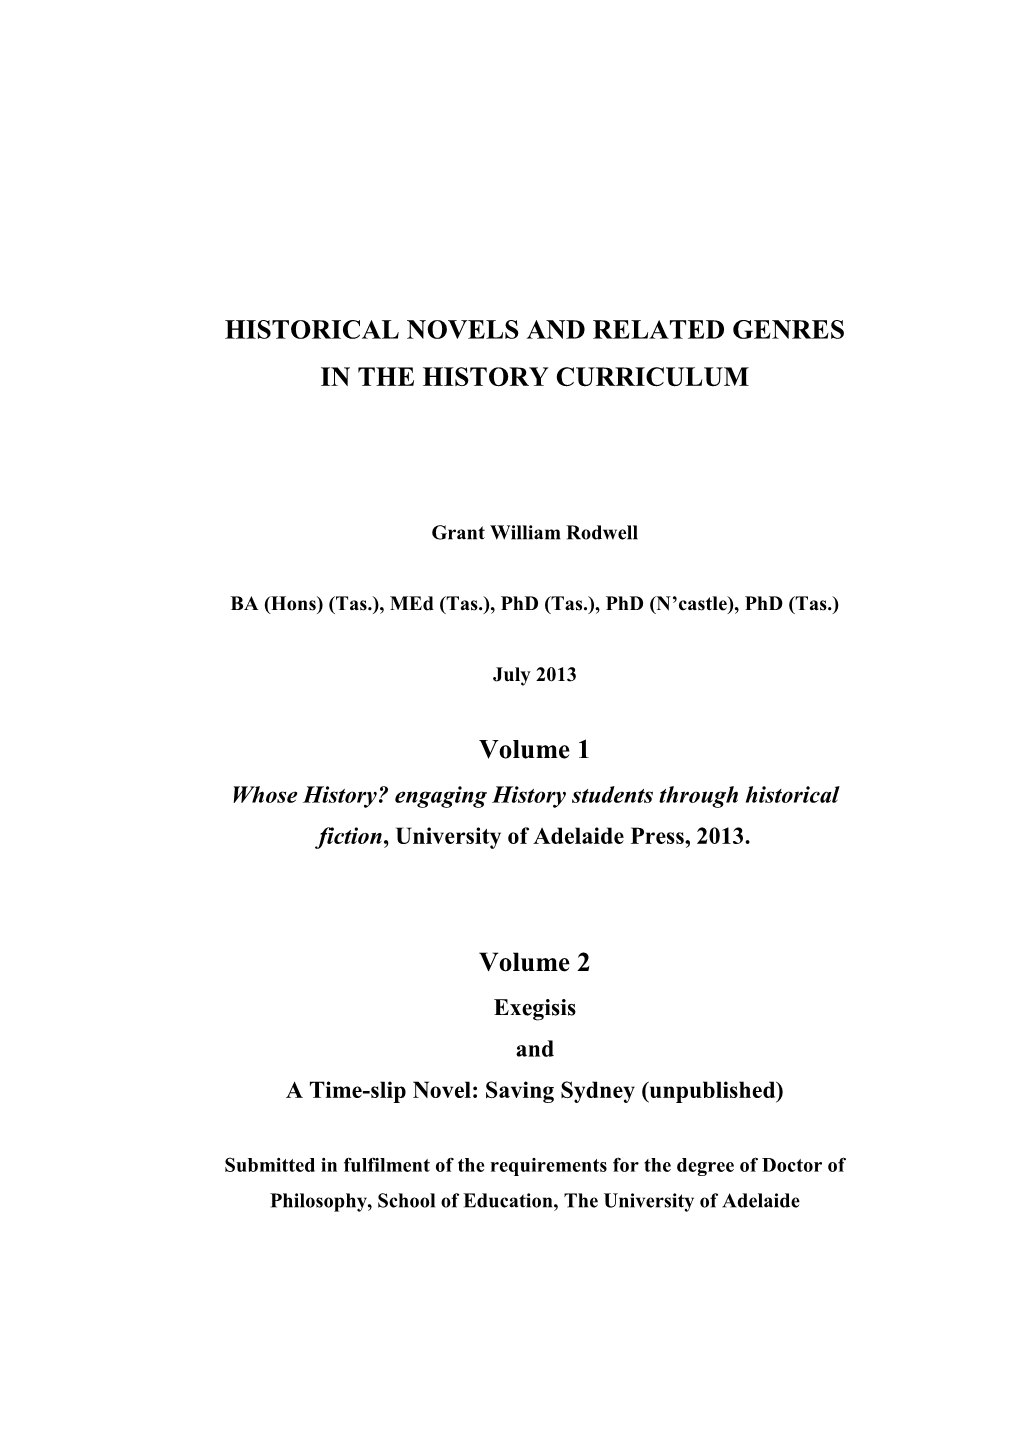 Historical Novels and Related Genres in the History Curriculum